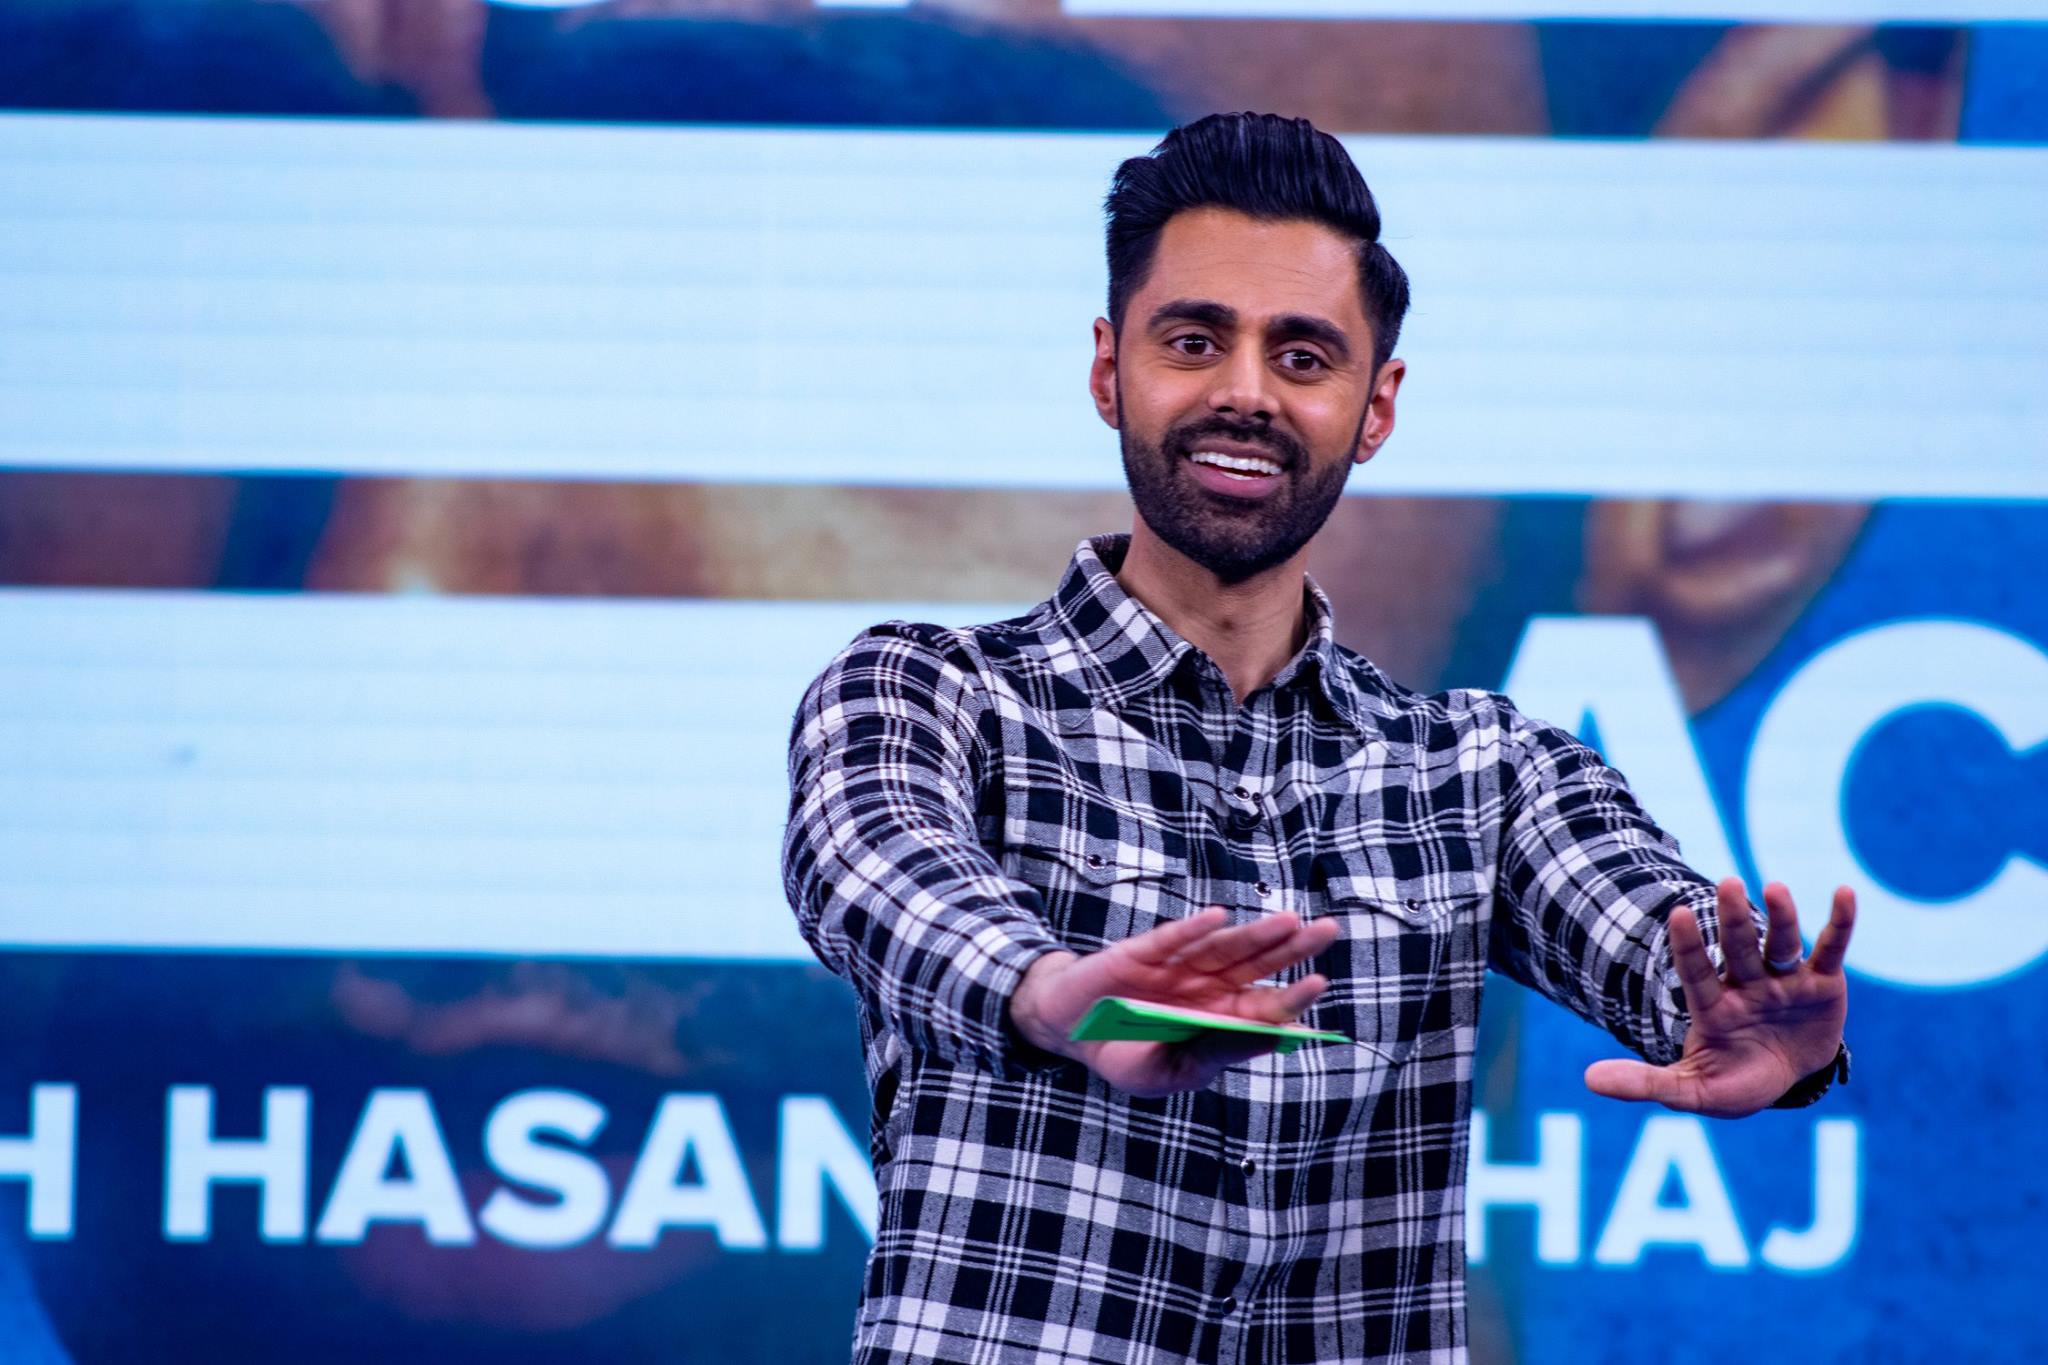 Comedian and host Hasan Minhaj on The Patriot Act. Photo: Show’s Facebook page.